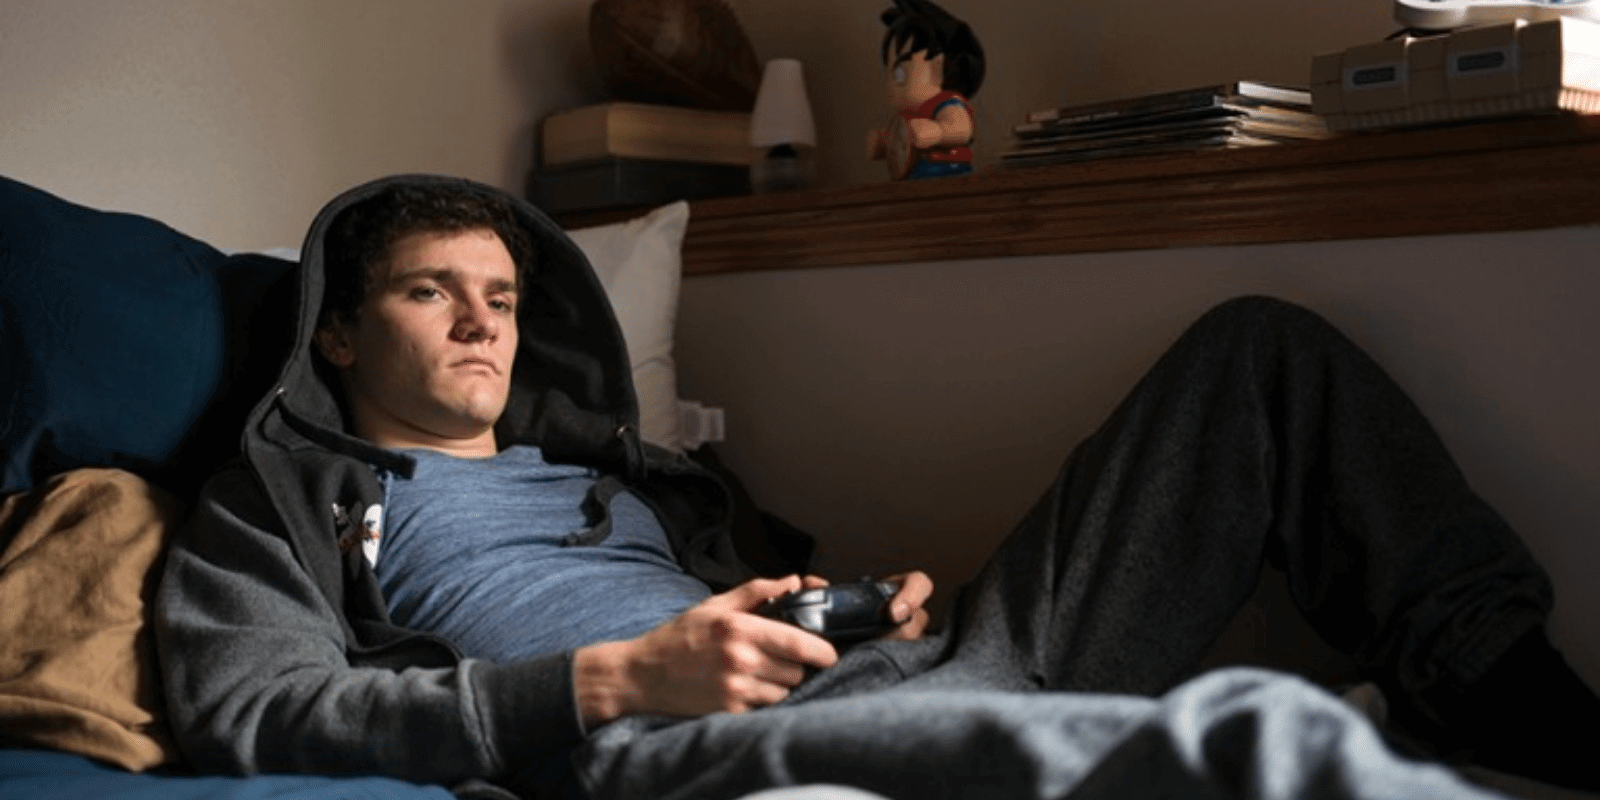 Teen boy in the bed playing video games